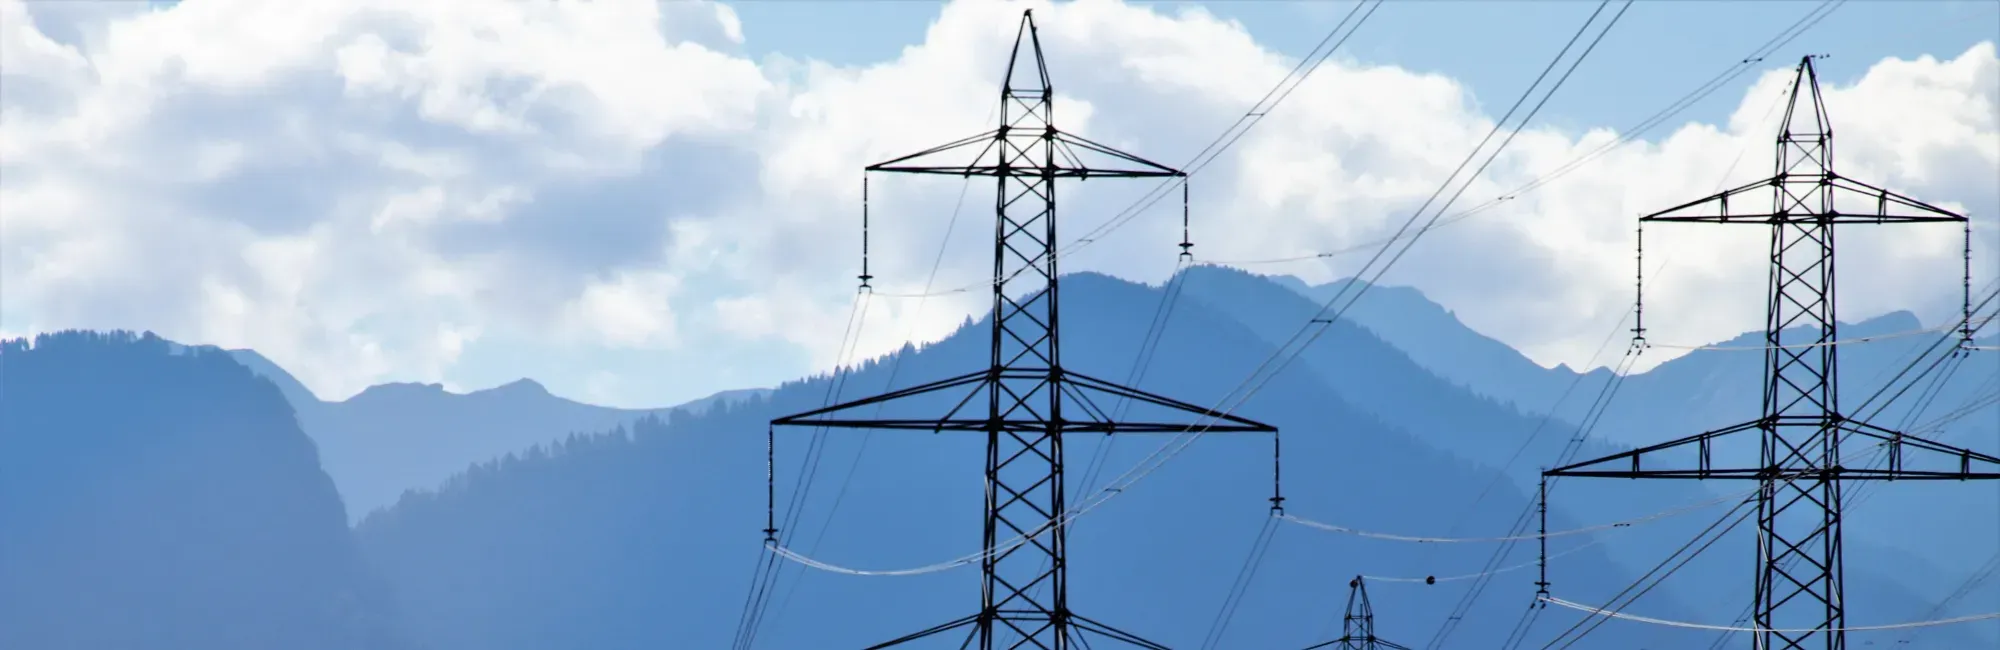 Energy pylons in front of misty mountains